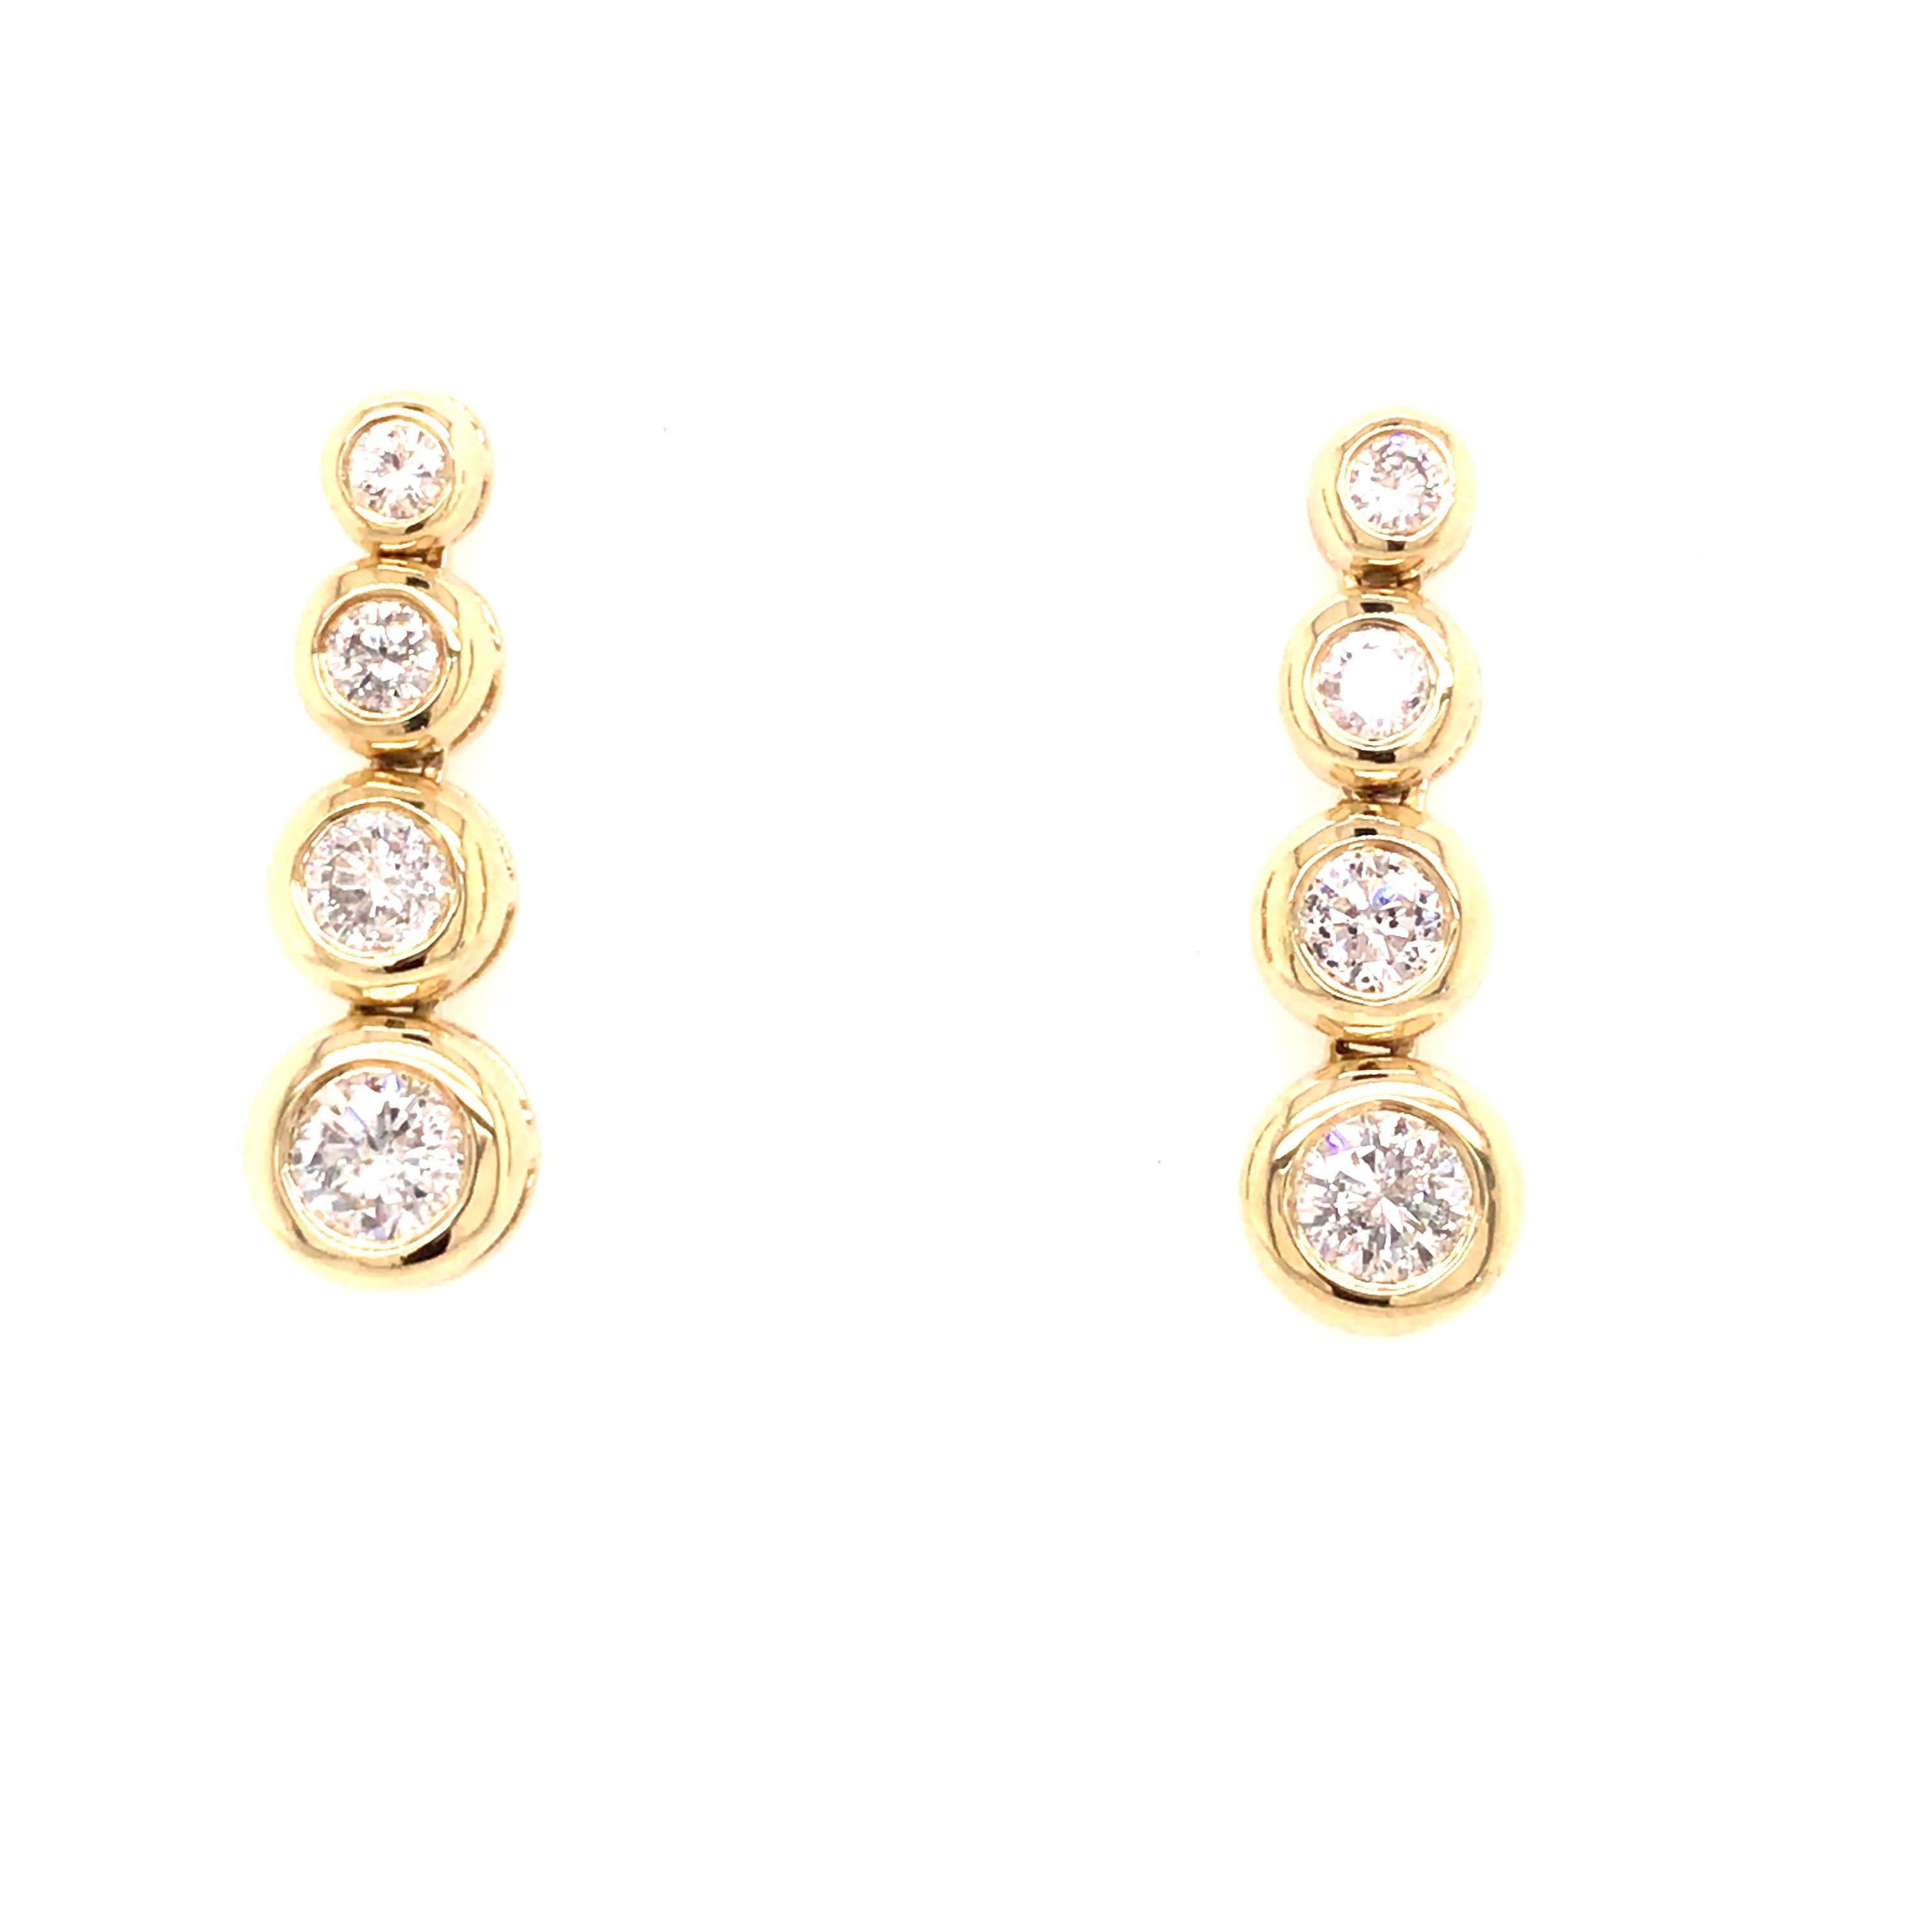 Graduated Diamond Bezel Set Earrings in 14K Yellow Gold.  (8) Round Brilliant Cut Diamonds weighing 1.82 carat total weight, G-I in color and VS-SI in clarity are expertly set.  The Earrings measure 15/16 inch in length and 5/16 inch in width at the